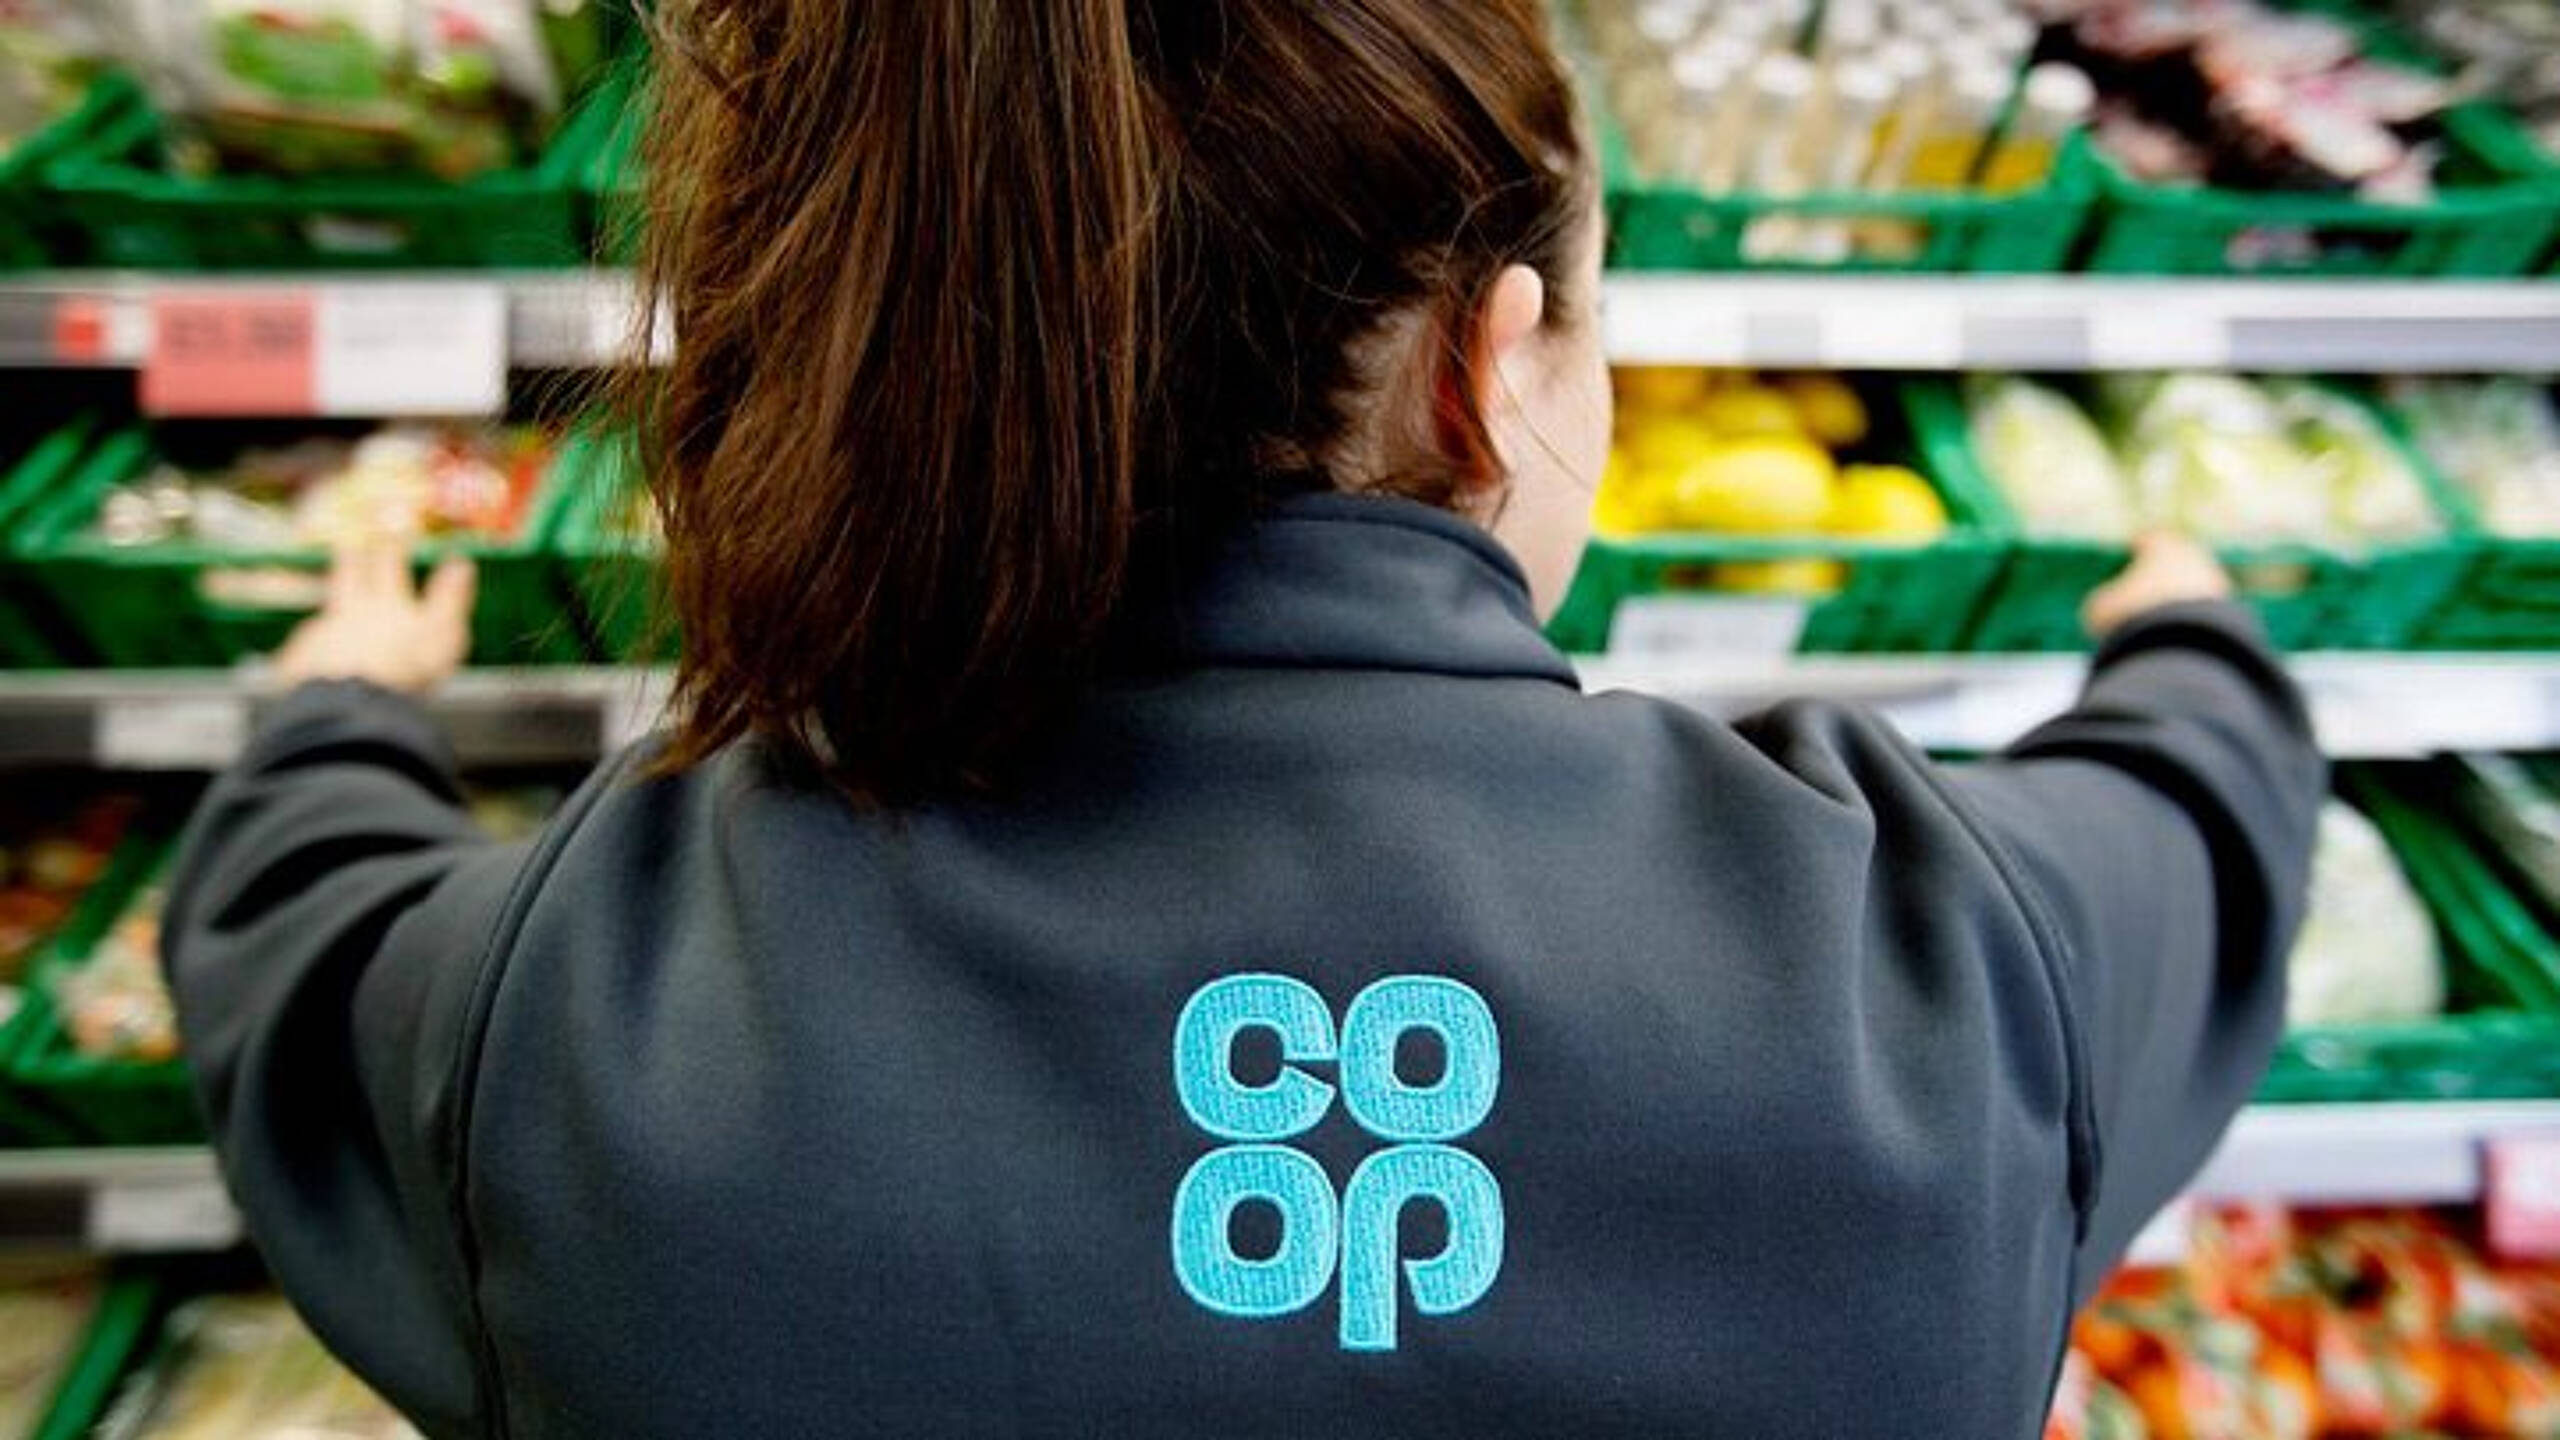 Co-op to fund innovative projects aimed at tackling emissions in food and farming